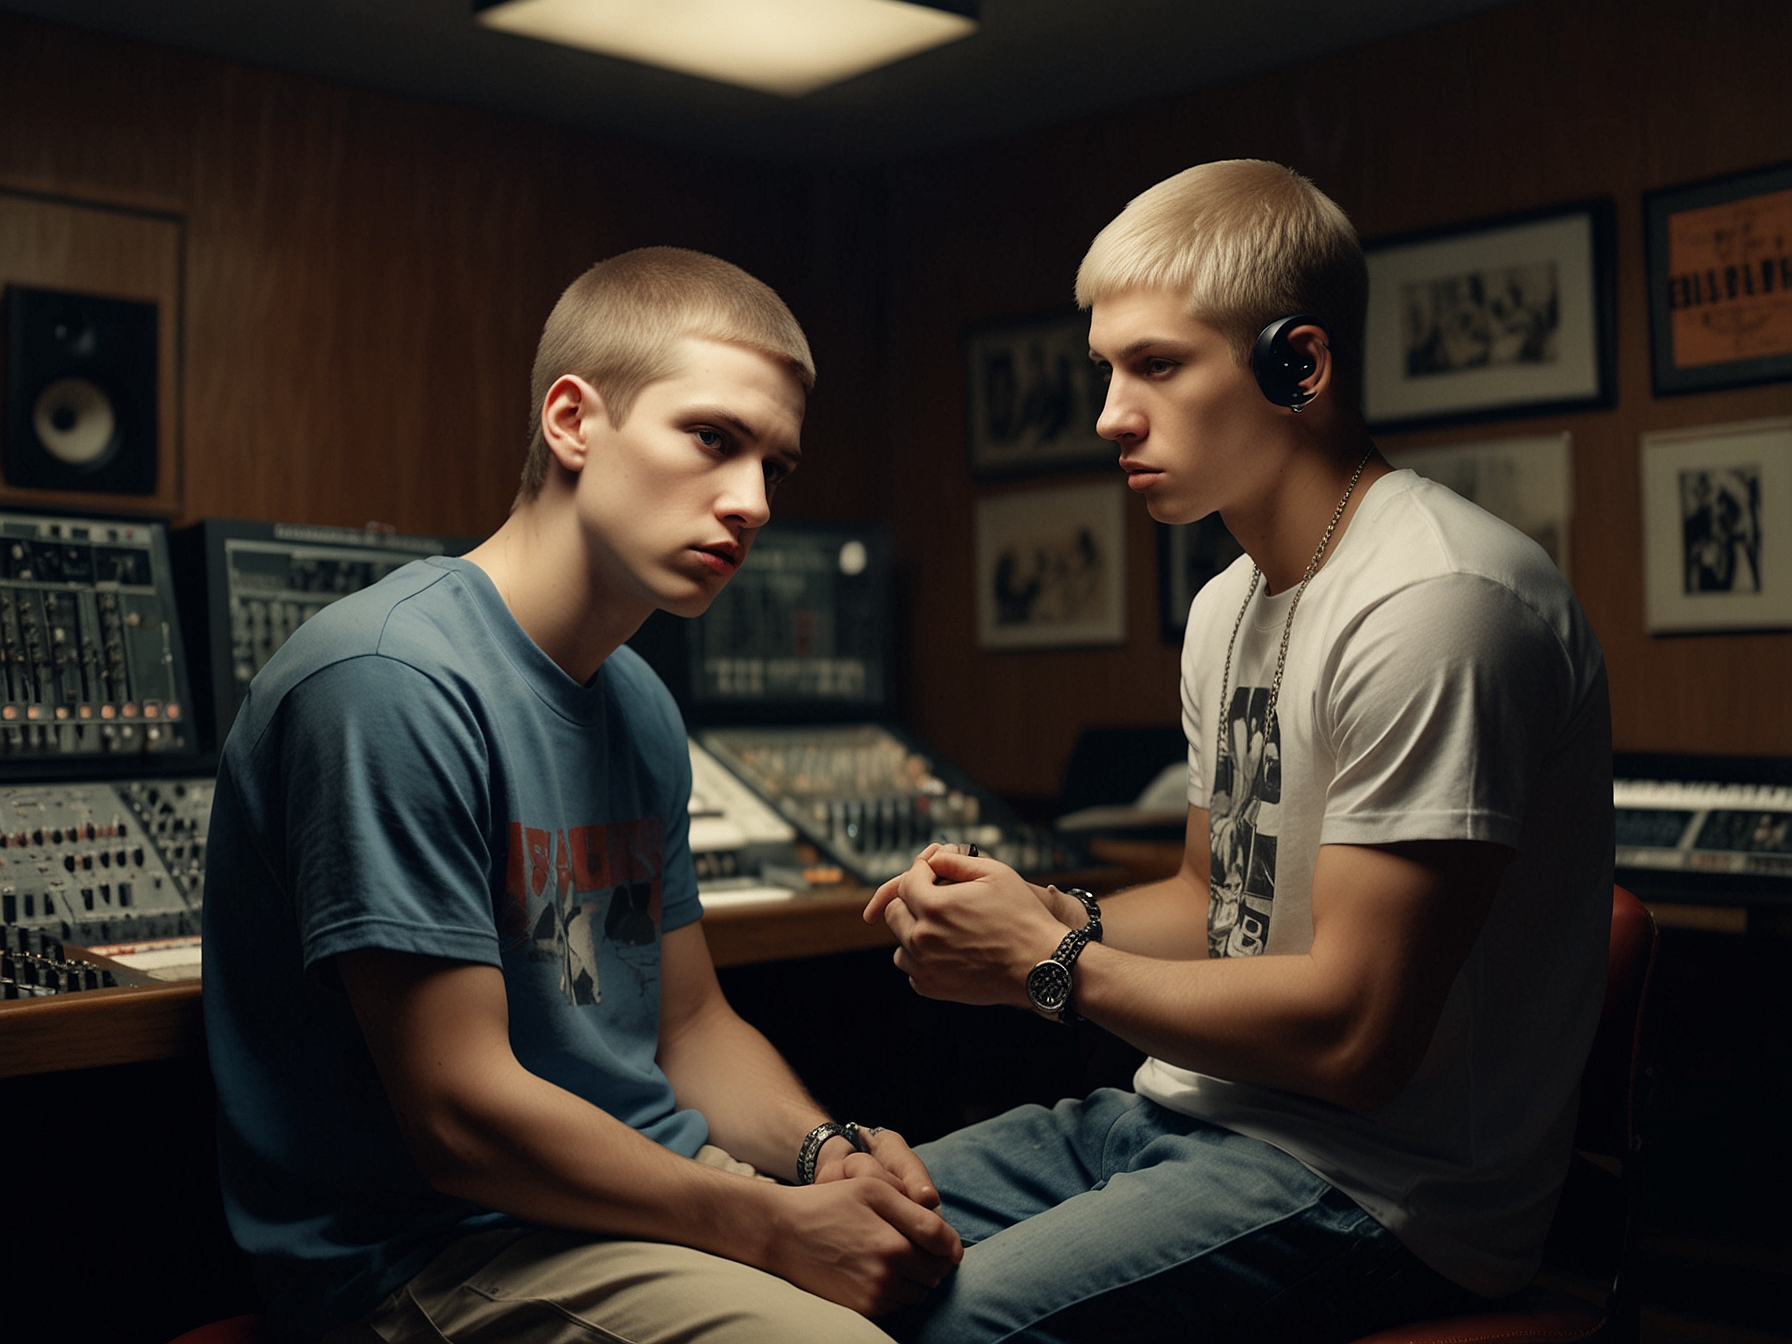 A split-screen image showing a young Eminem in a recording studio juxtaposed with the cover of the 1980s song he sampled. This highlights the controversial choice and the era it originated from.